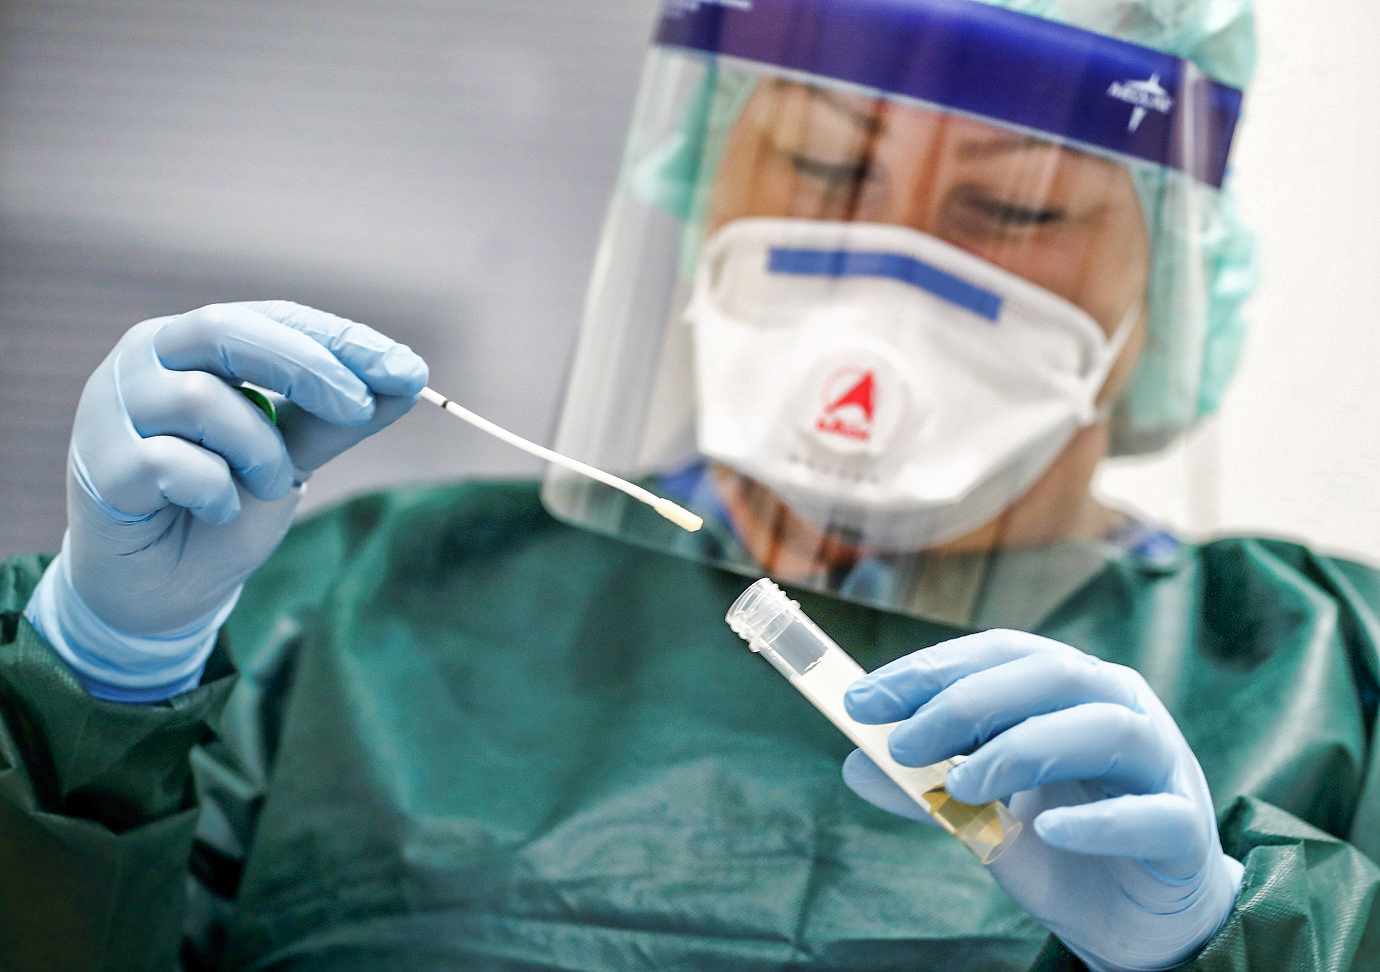 Canan Emcan, 31, chief nurse of the infection and virologist ward of the university clinic of Essen closes a sample of a smear test to be used in case of coronavirus patients during a media event in Essen, Germany, March 5, 2020.   REUTERS/Wolfgang Rattay